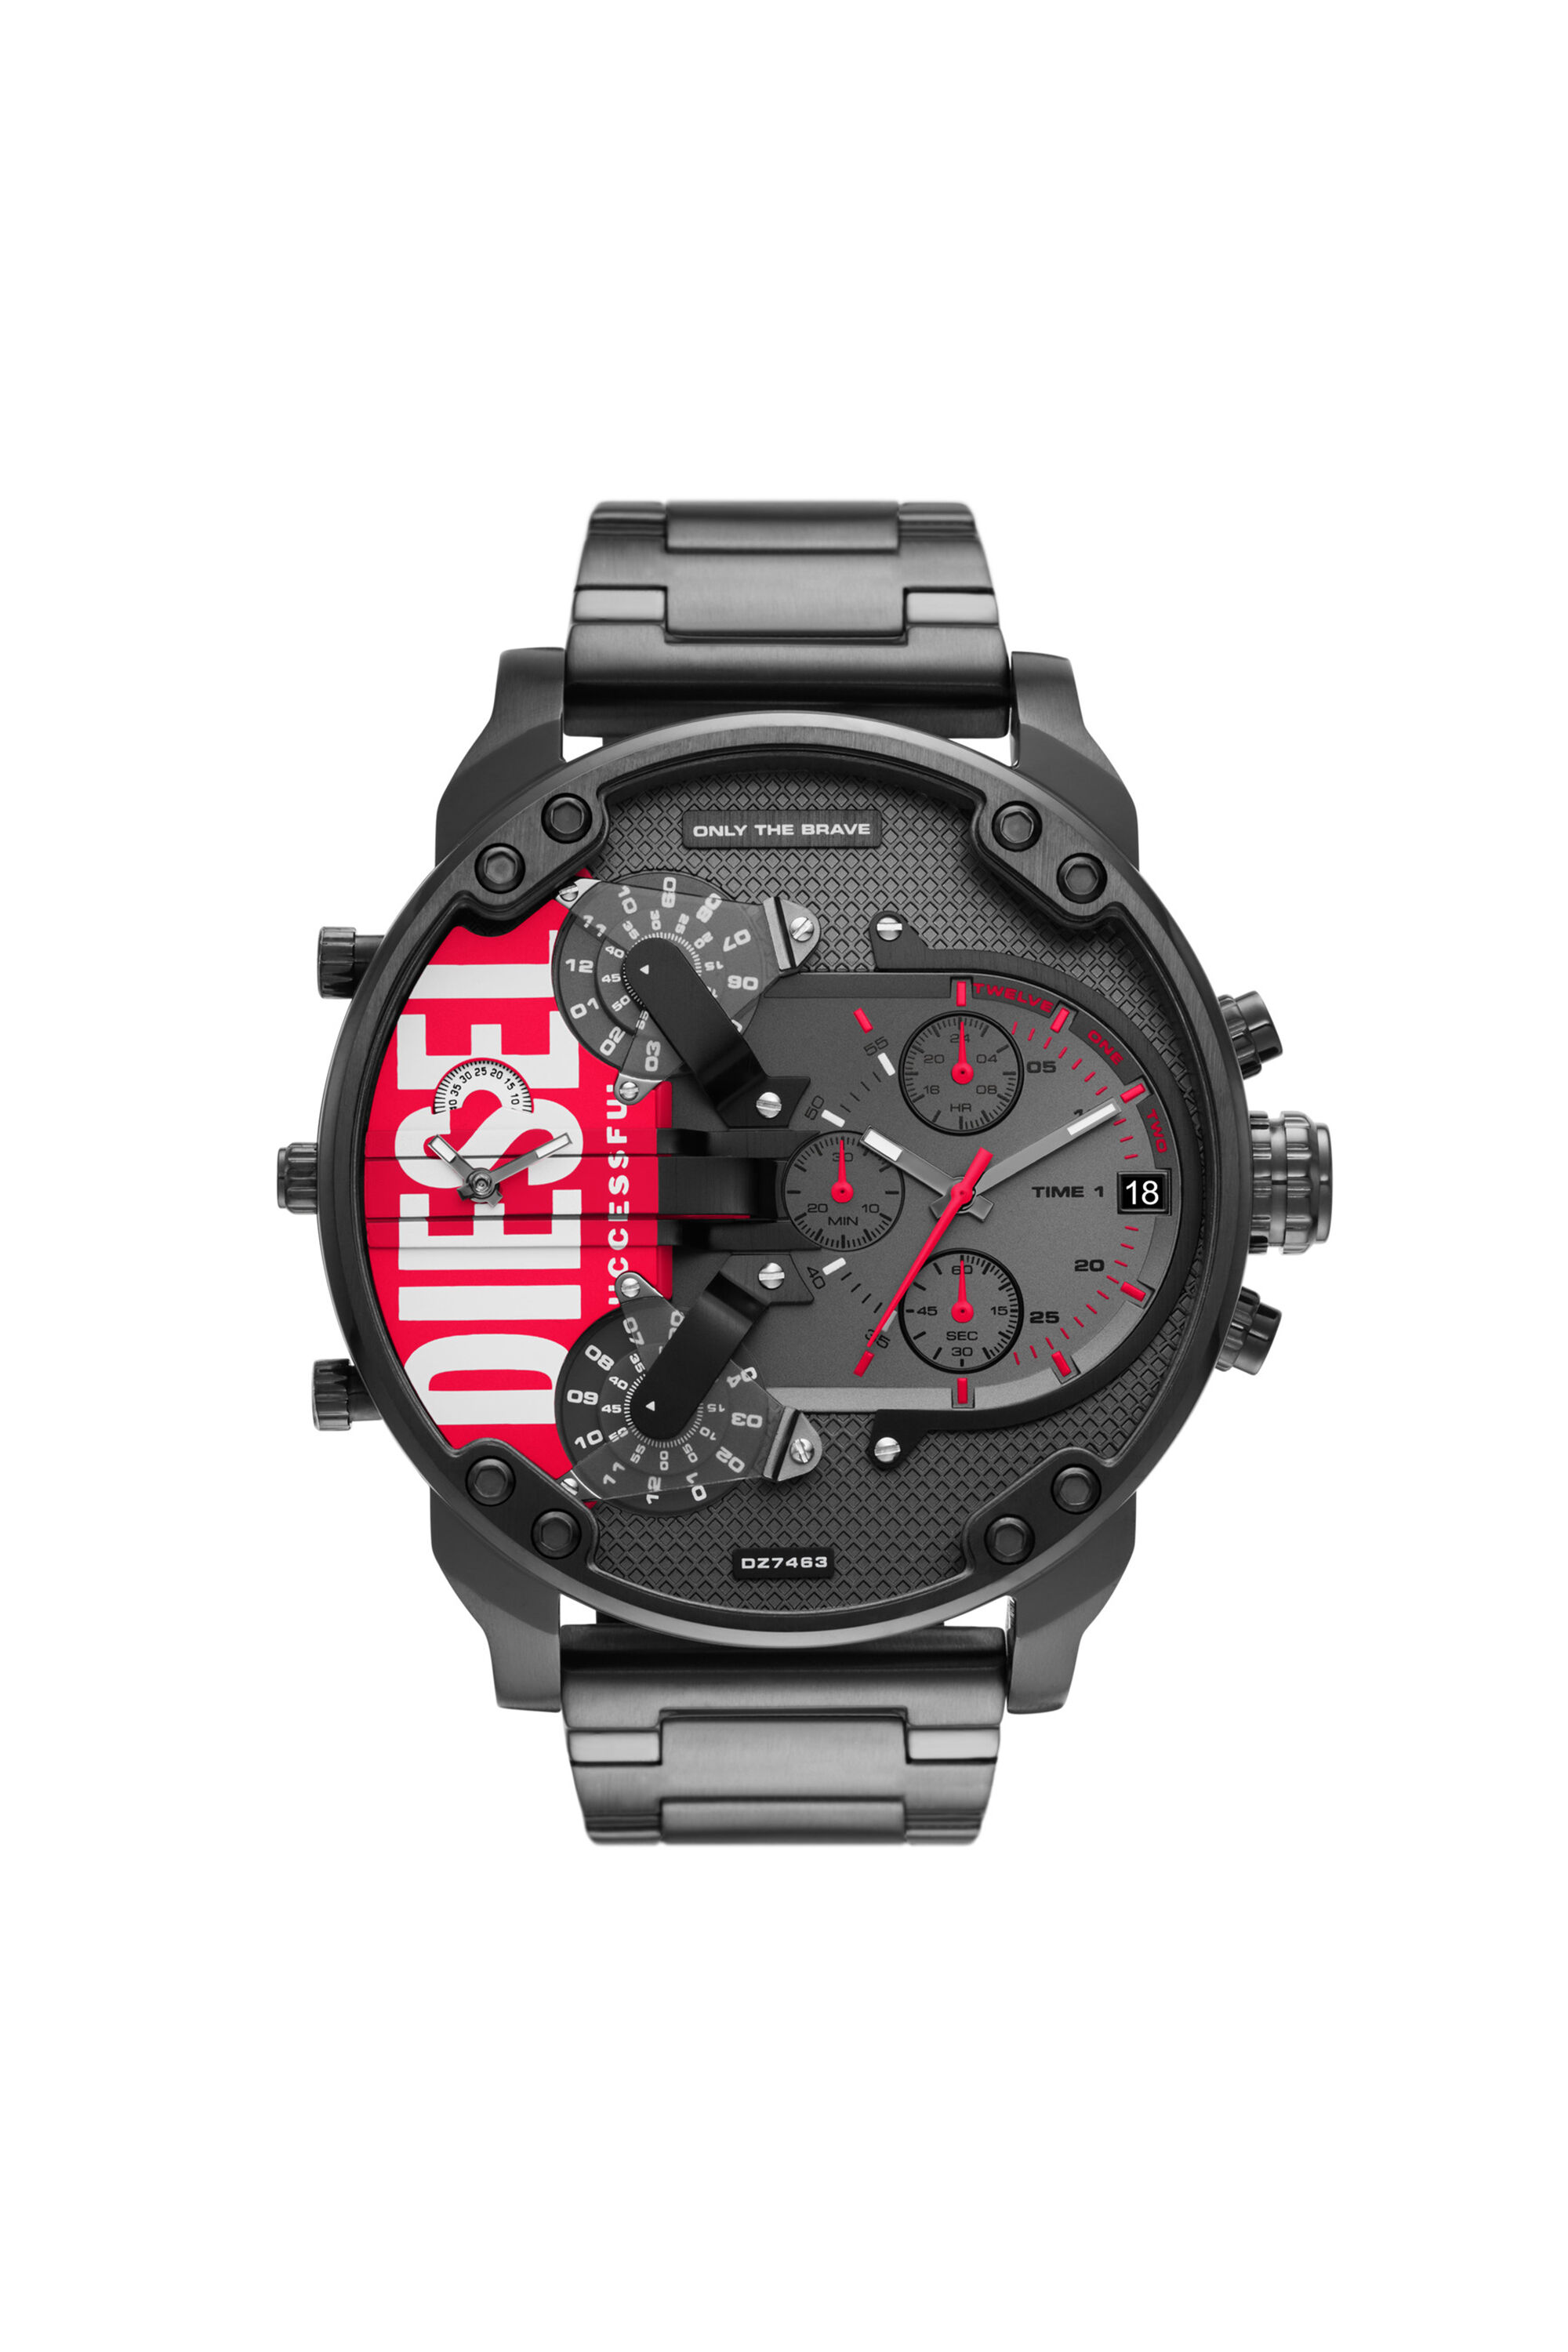 DIESEL only-The-Brave watch